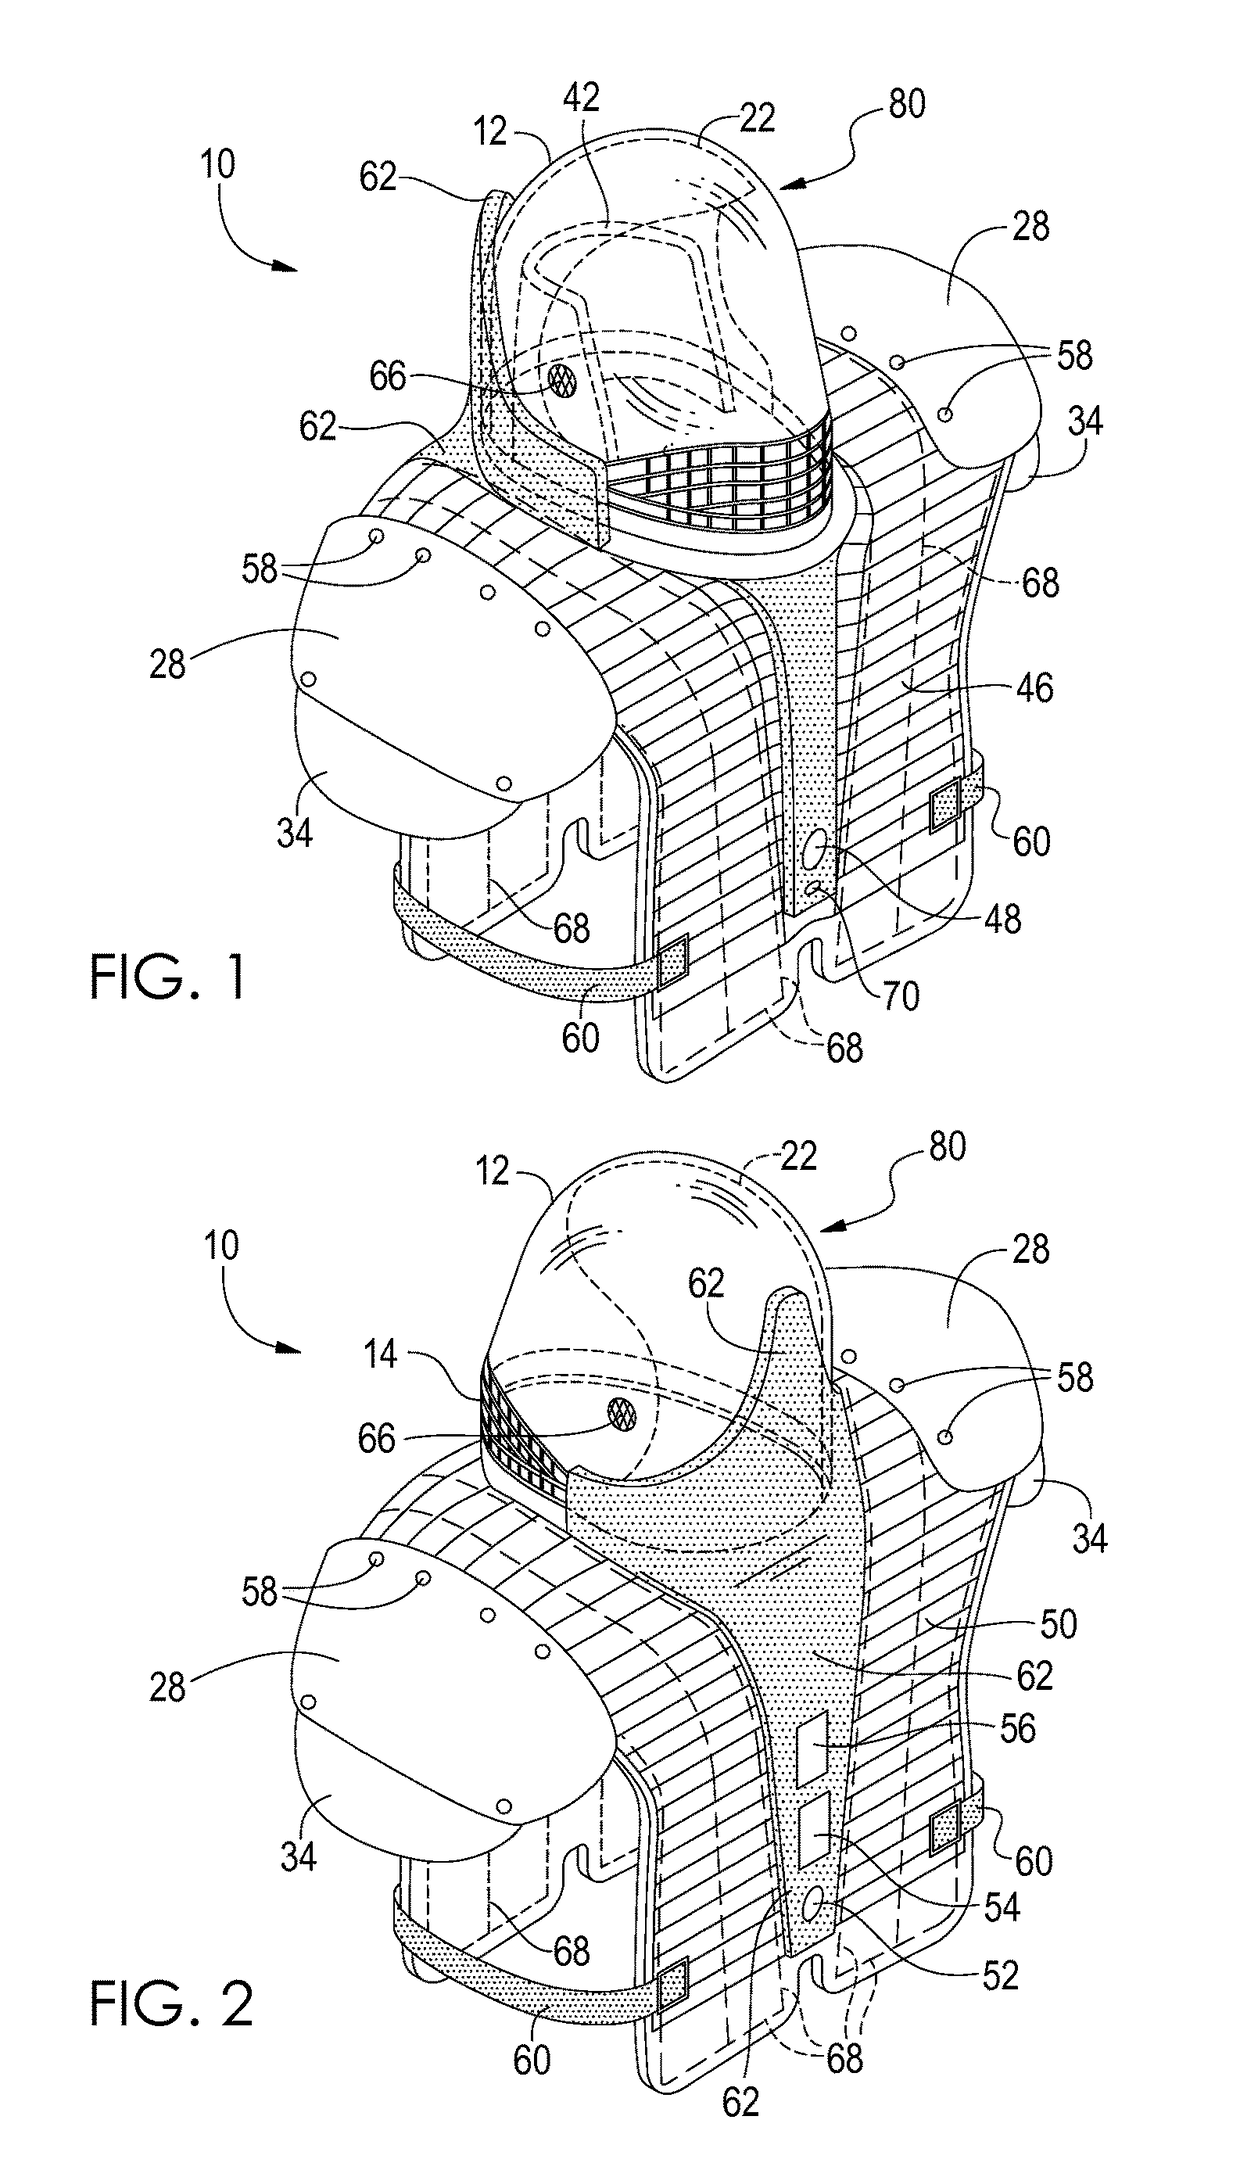 Method and apparatus for improved helmet